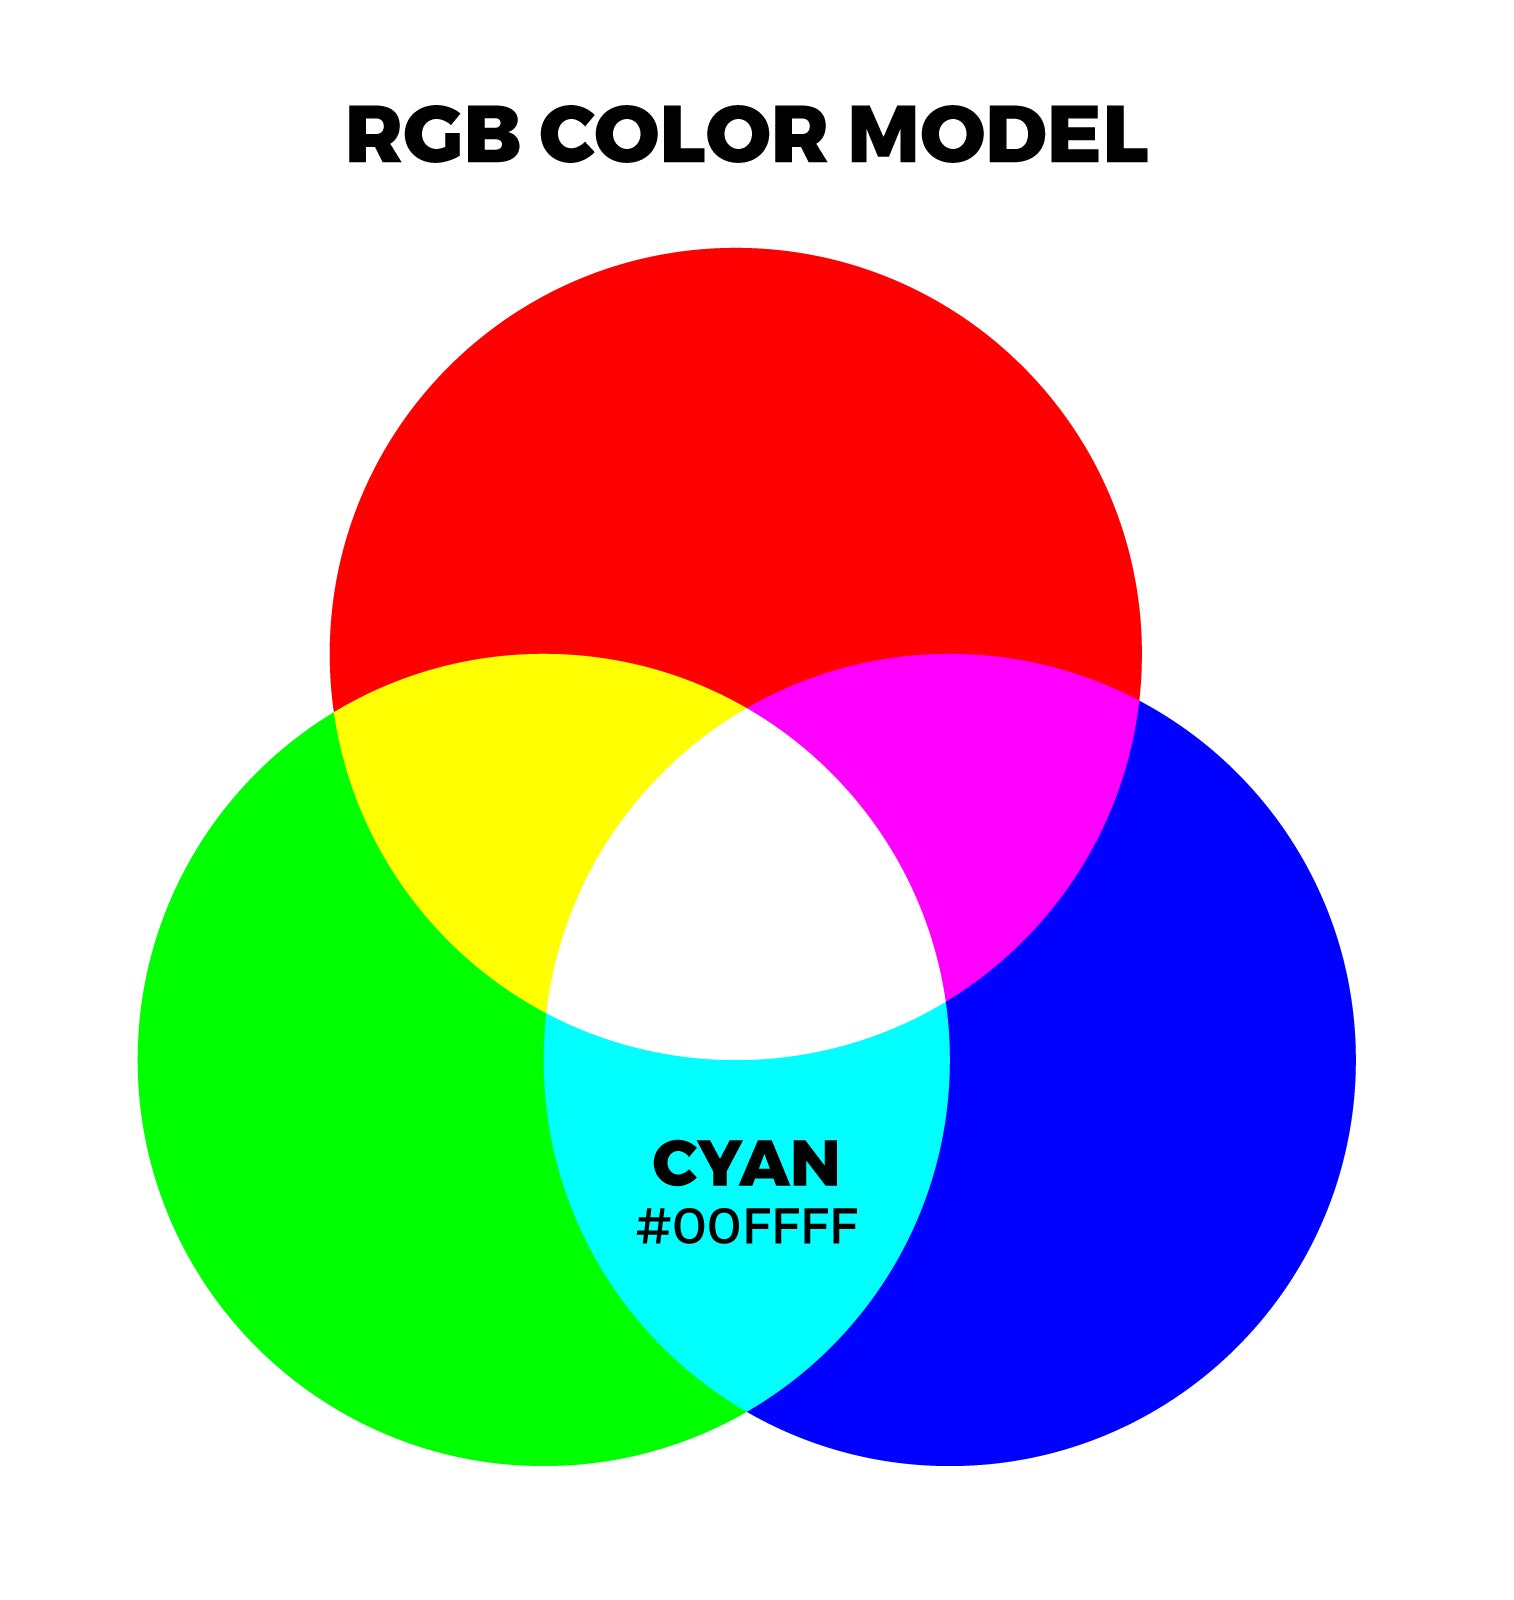 What-Color-Does-Blue-and-Green-Make-When-Mixed-with-Lights-Additive-RGB-Color-Model